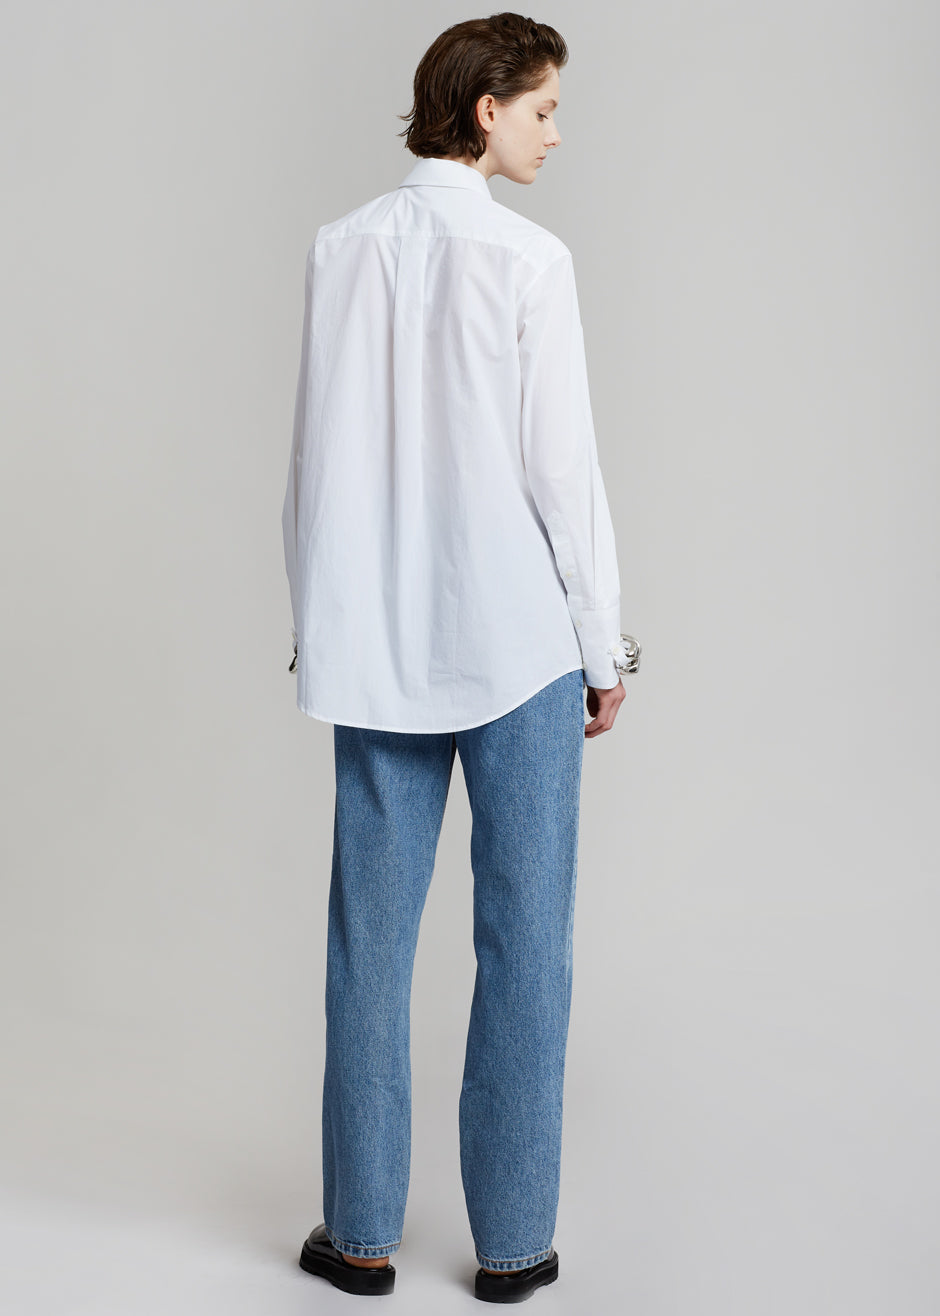 JW Anderson Silver Chain Link Shirt - White - 6